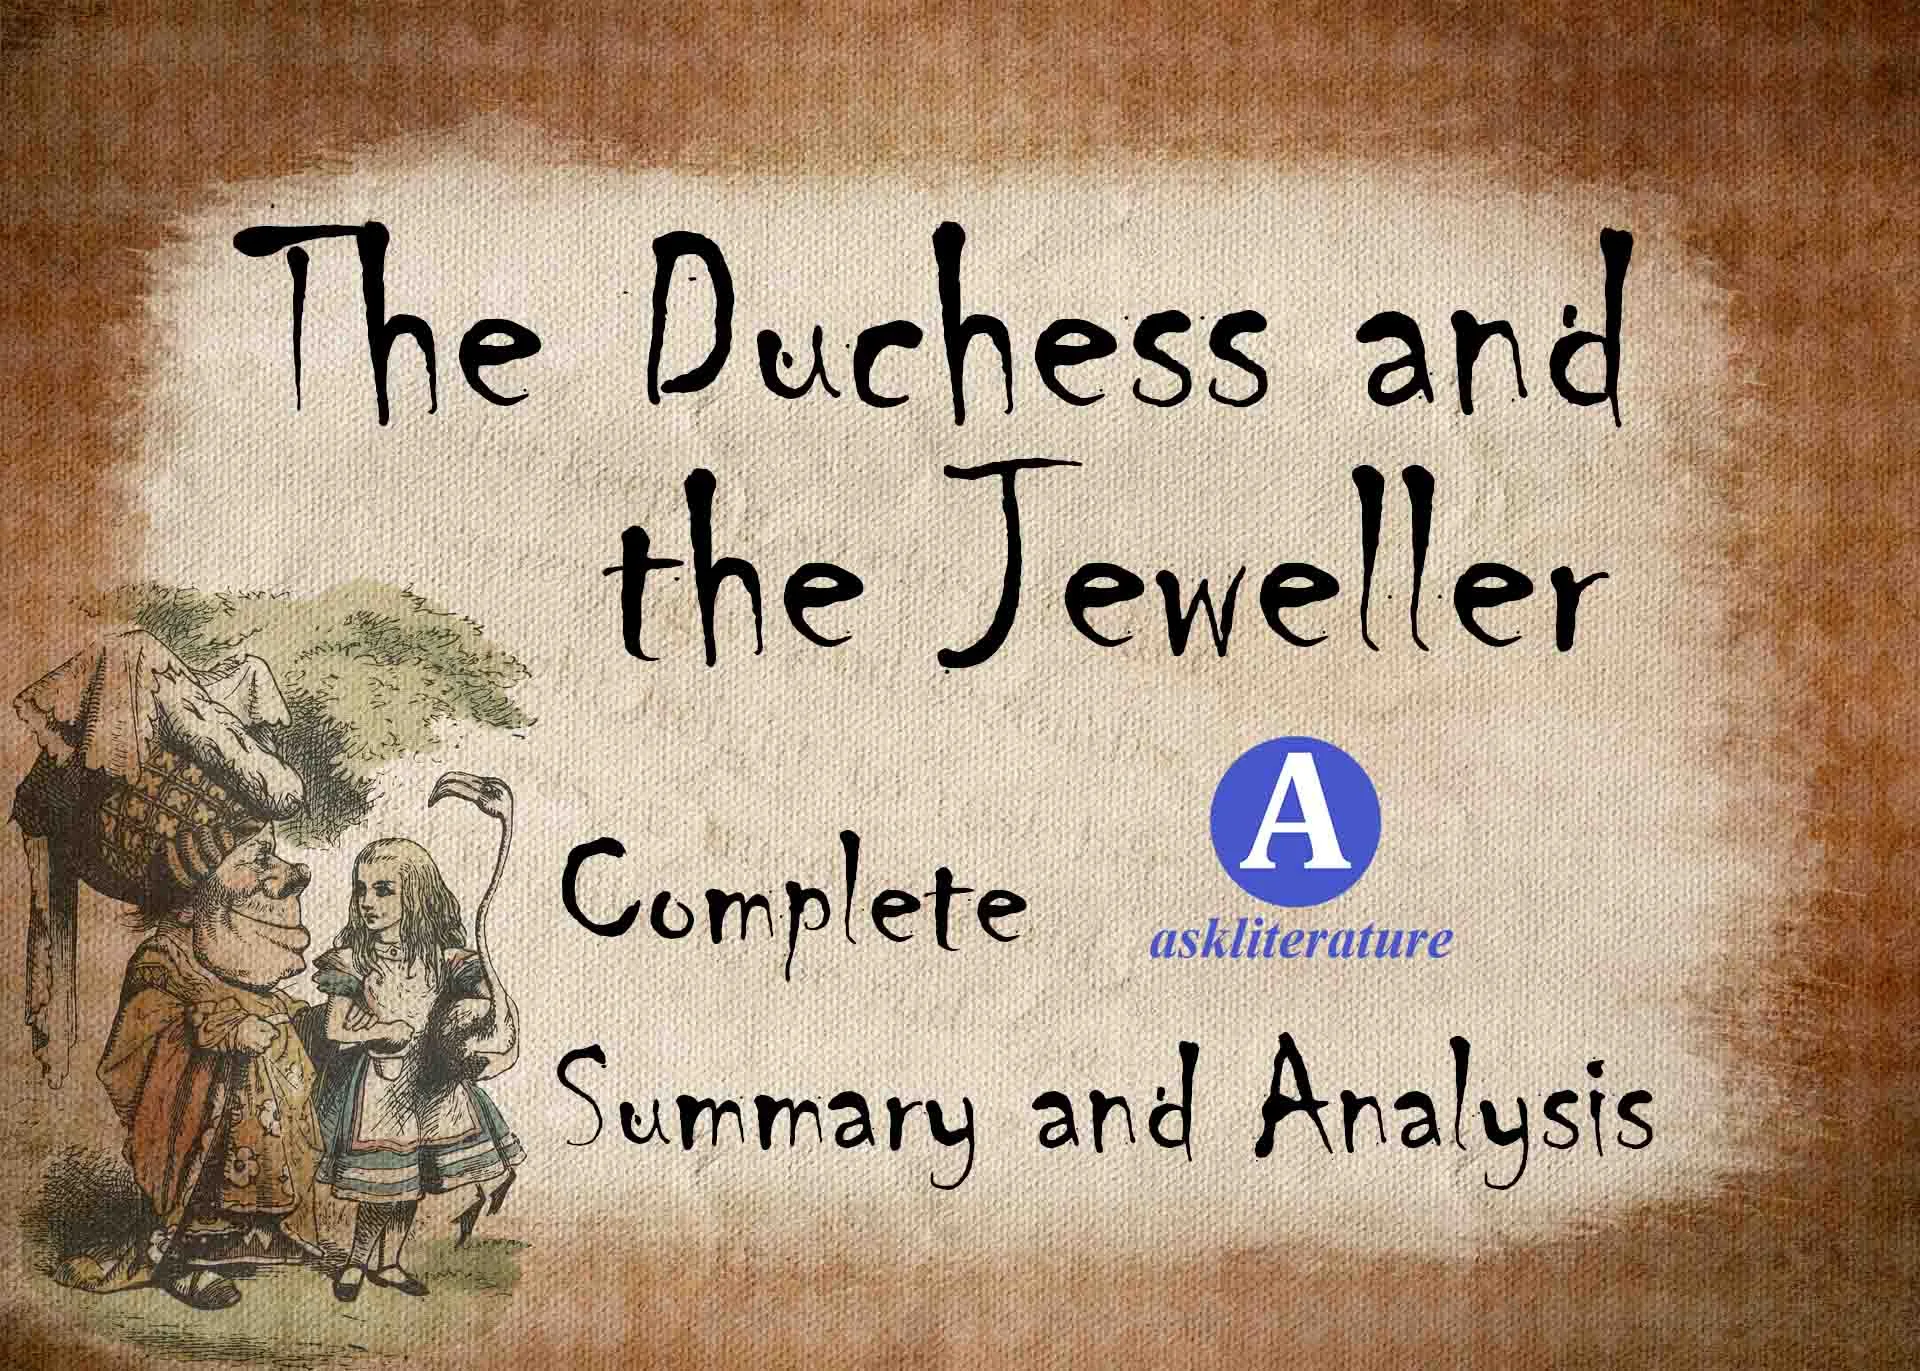 The Duchess and the Jeweller Complete Summary and Analysis